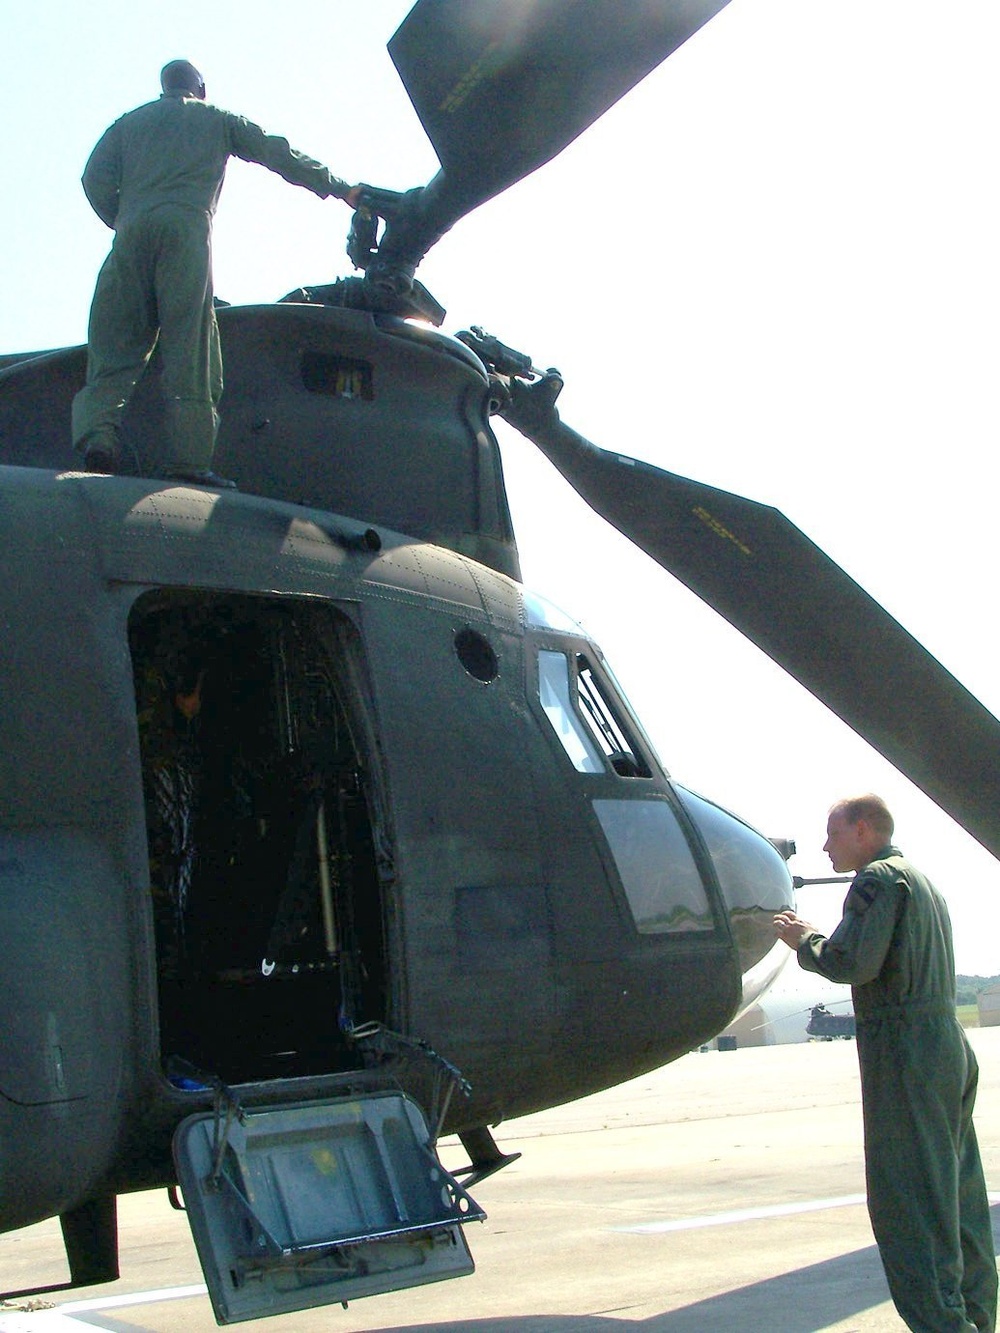 CW3 Upshaw inspects the rear engines during a preflight check